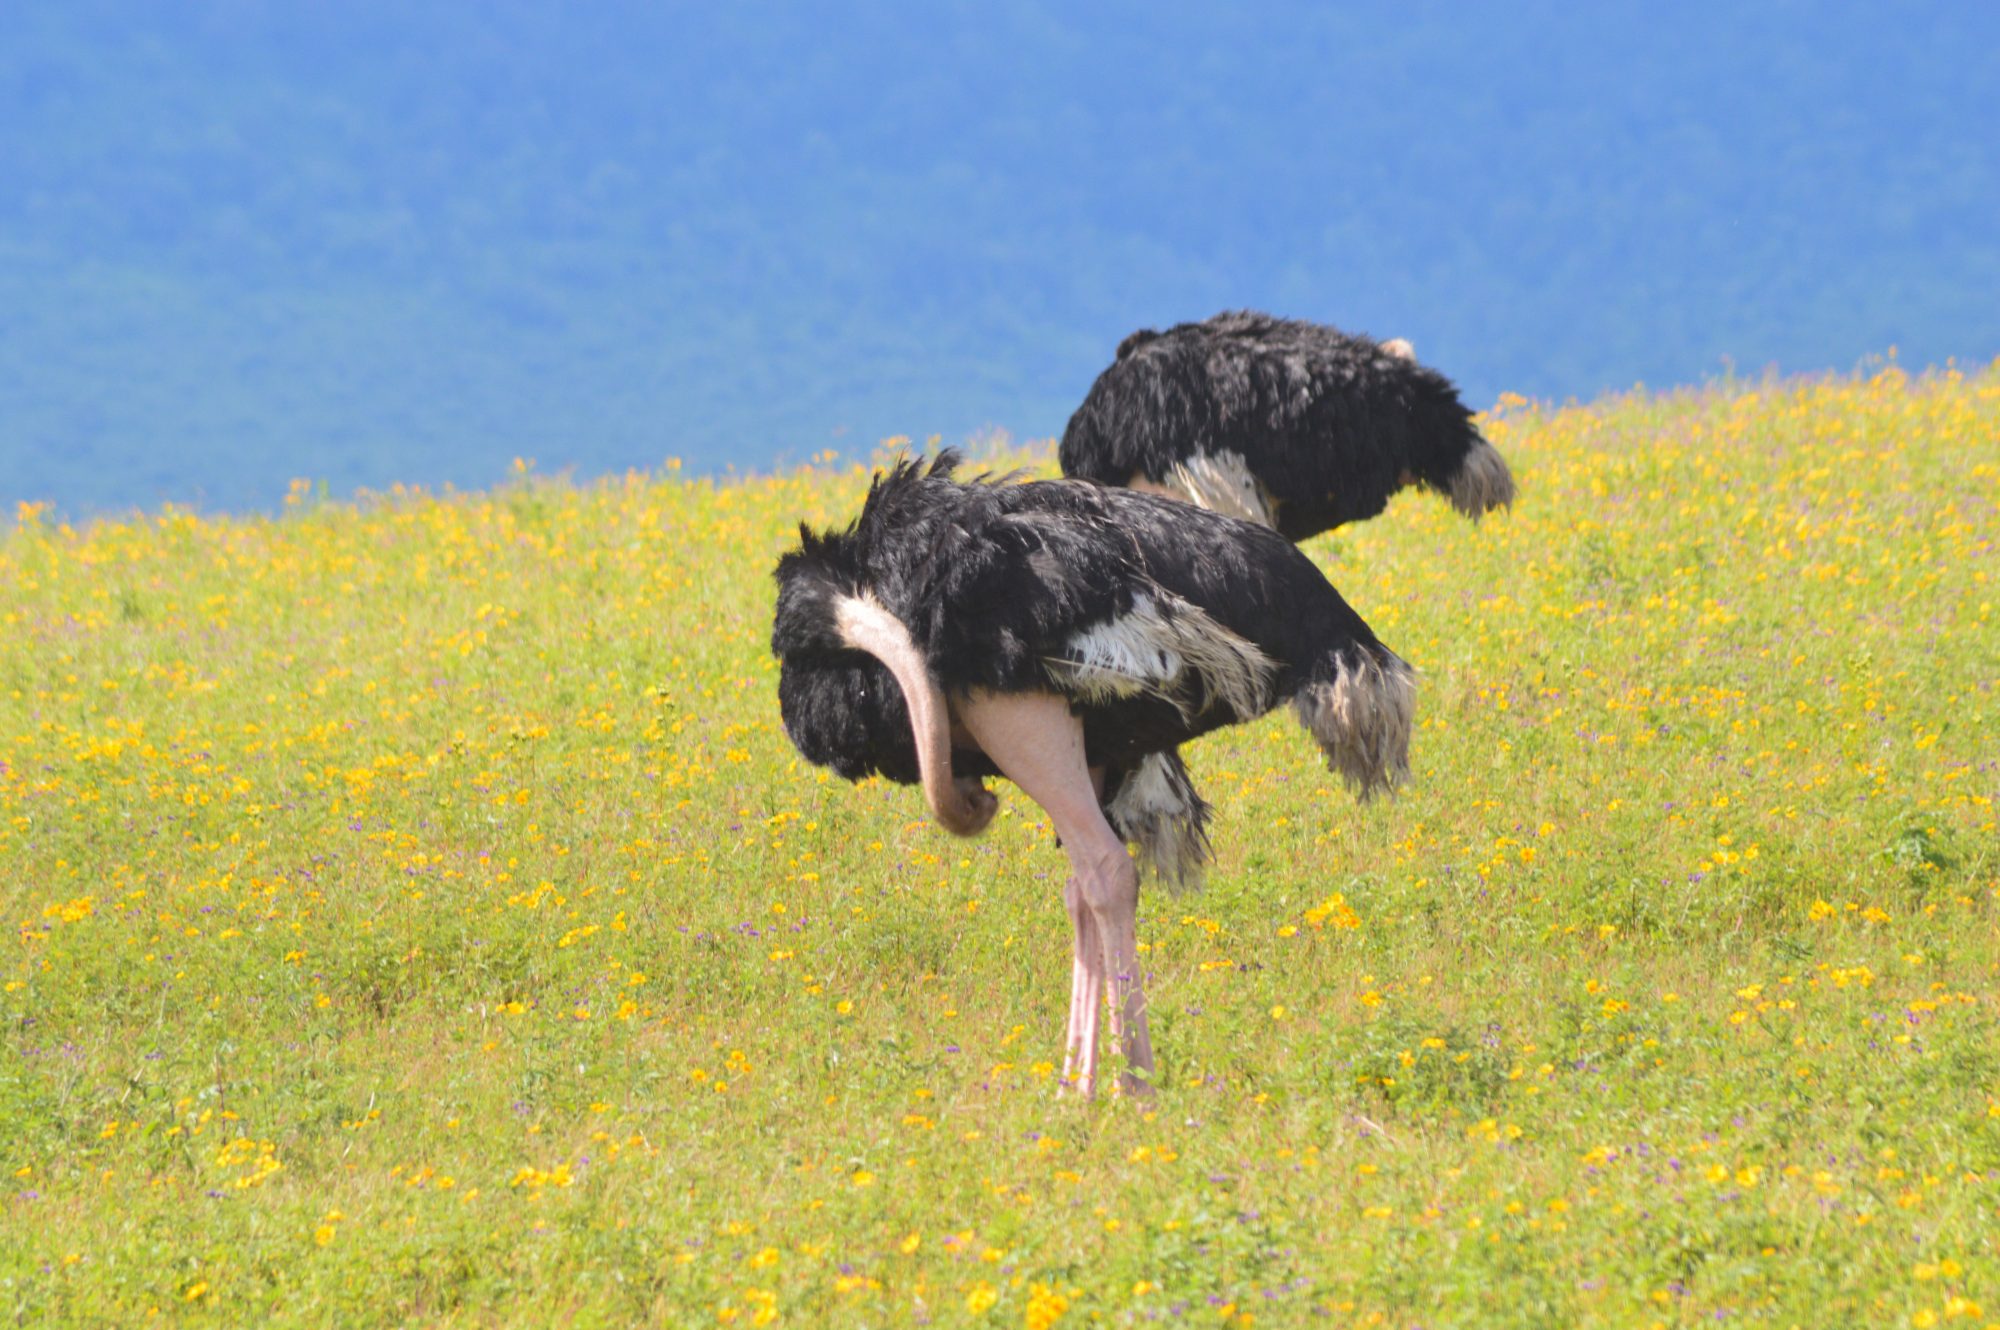 Ostriches in Ngorongoro Crater